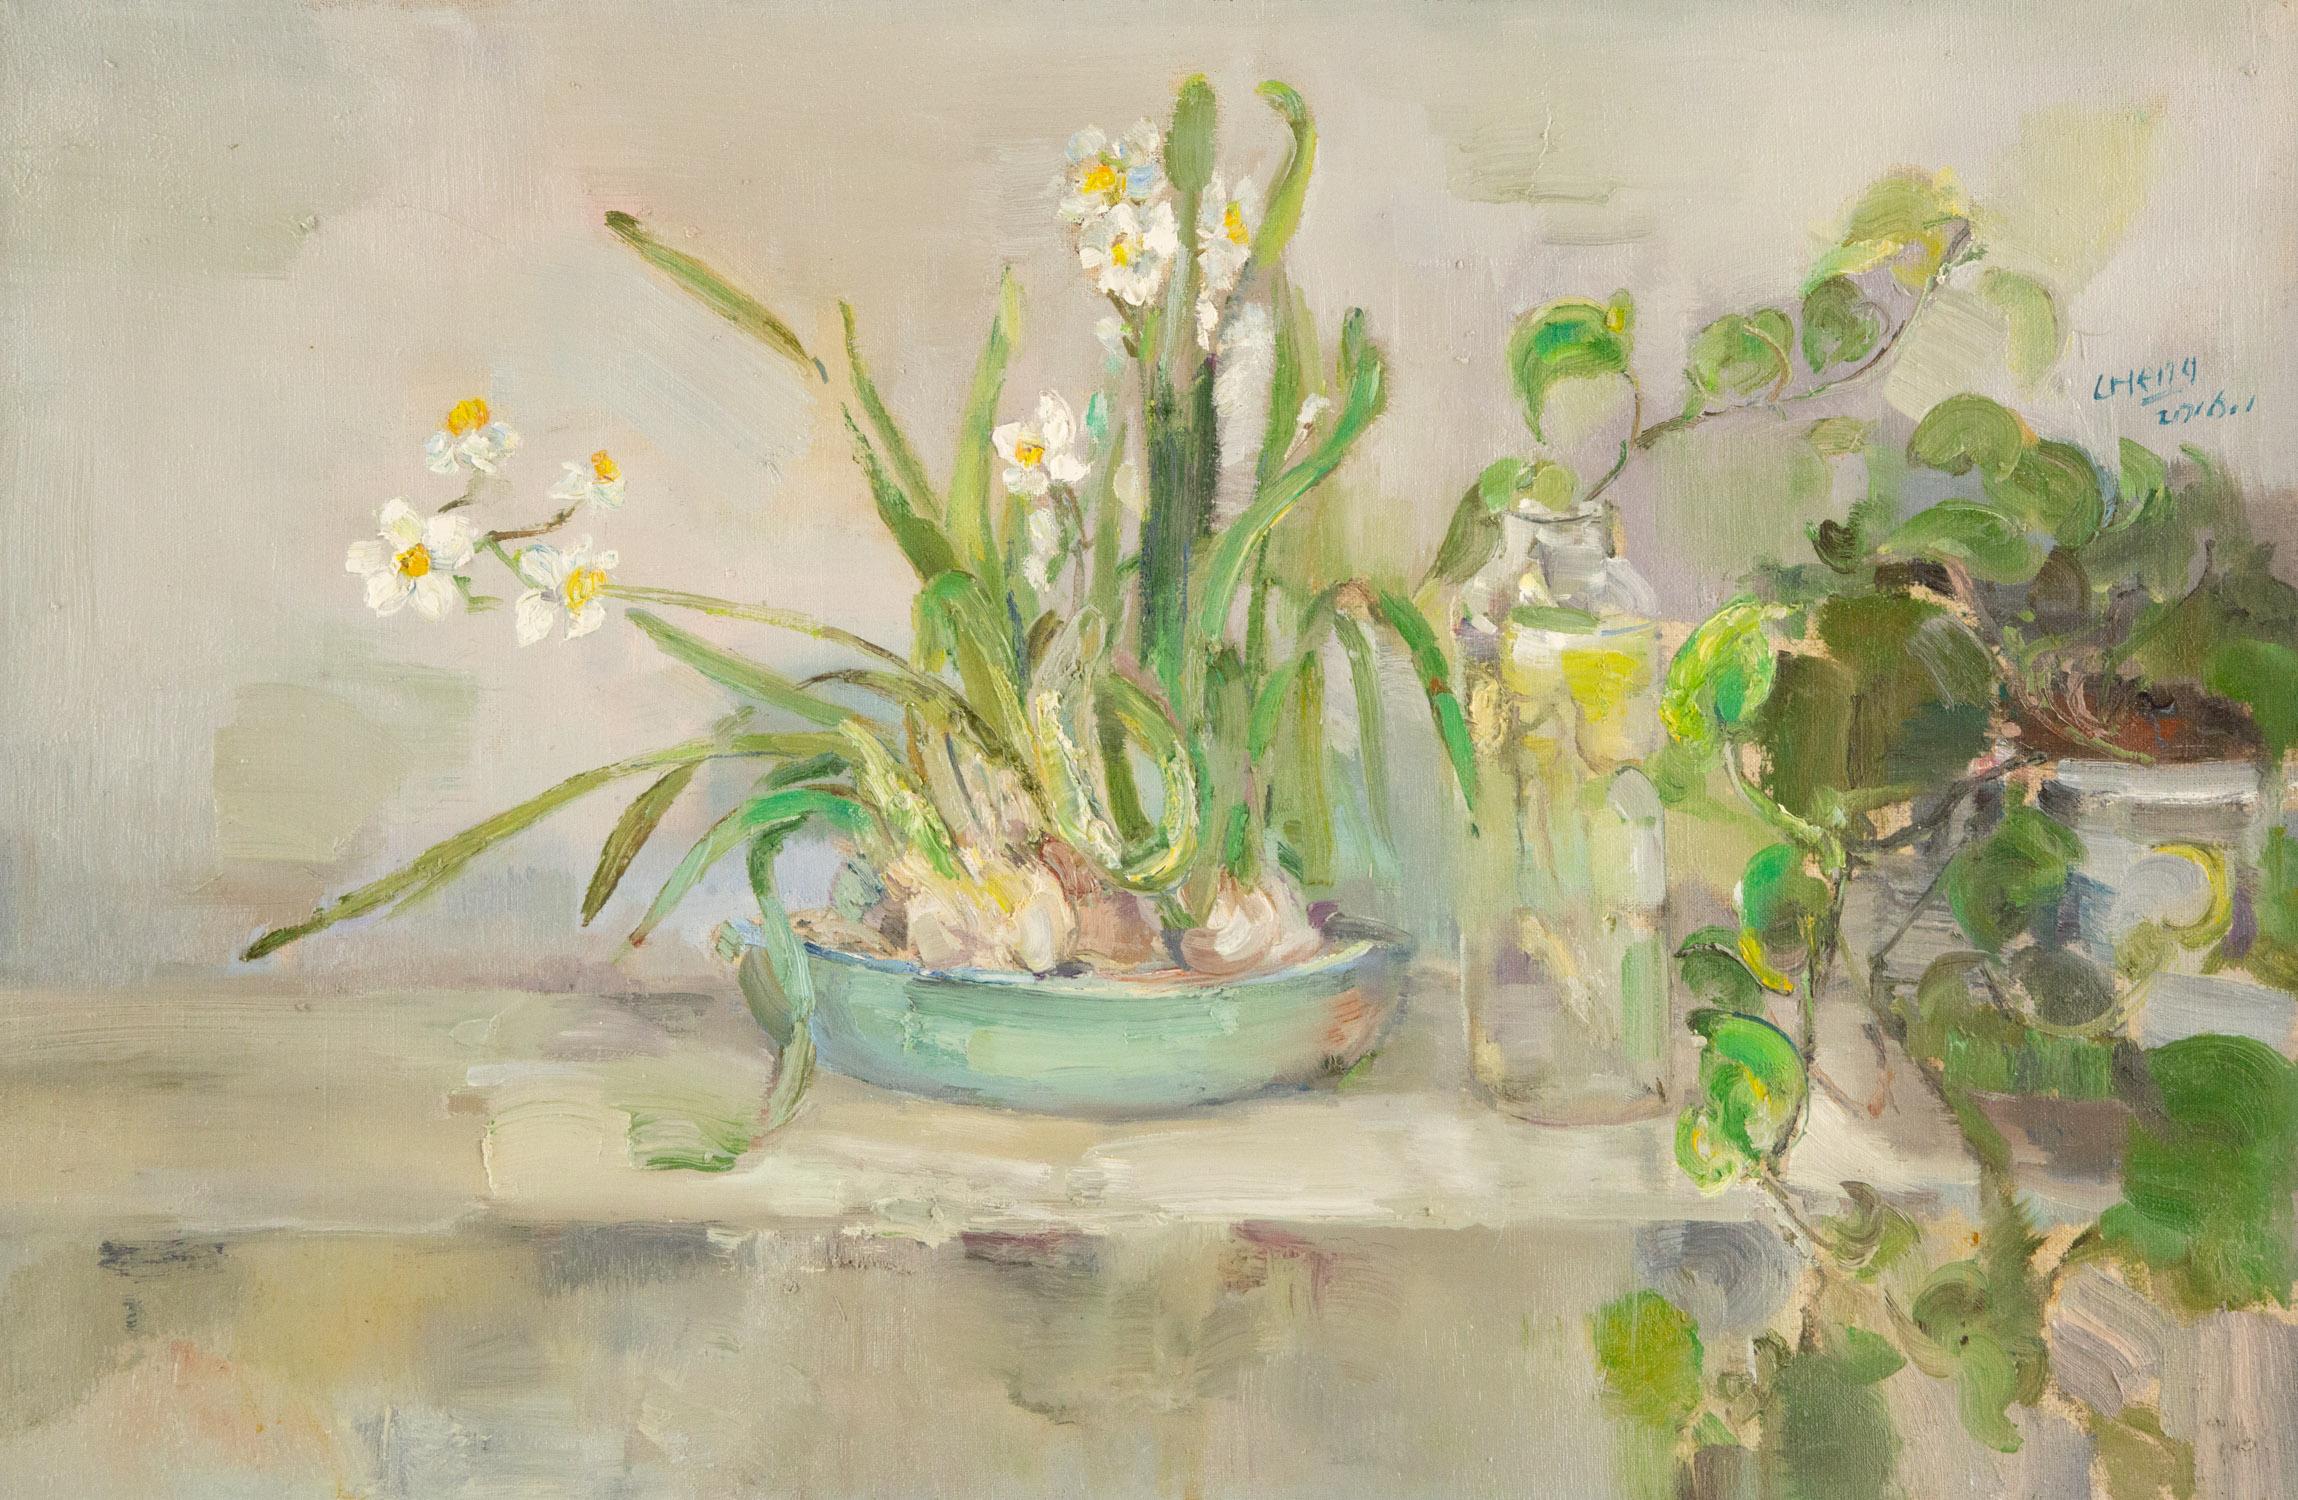 Title: Daffodils
Medium: Oil on canvas
Size: 15.5 x 23 inches
Frame: Framing options available!
Condition: The painting appears to be in excellent condition.
Note: This painting is unstretched
Year: 2016
Artist: Cheng Wang
Signature: